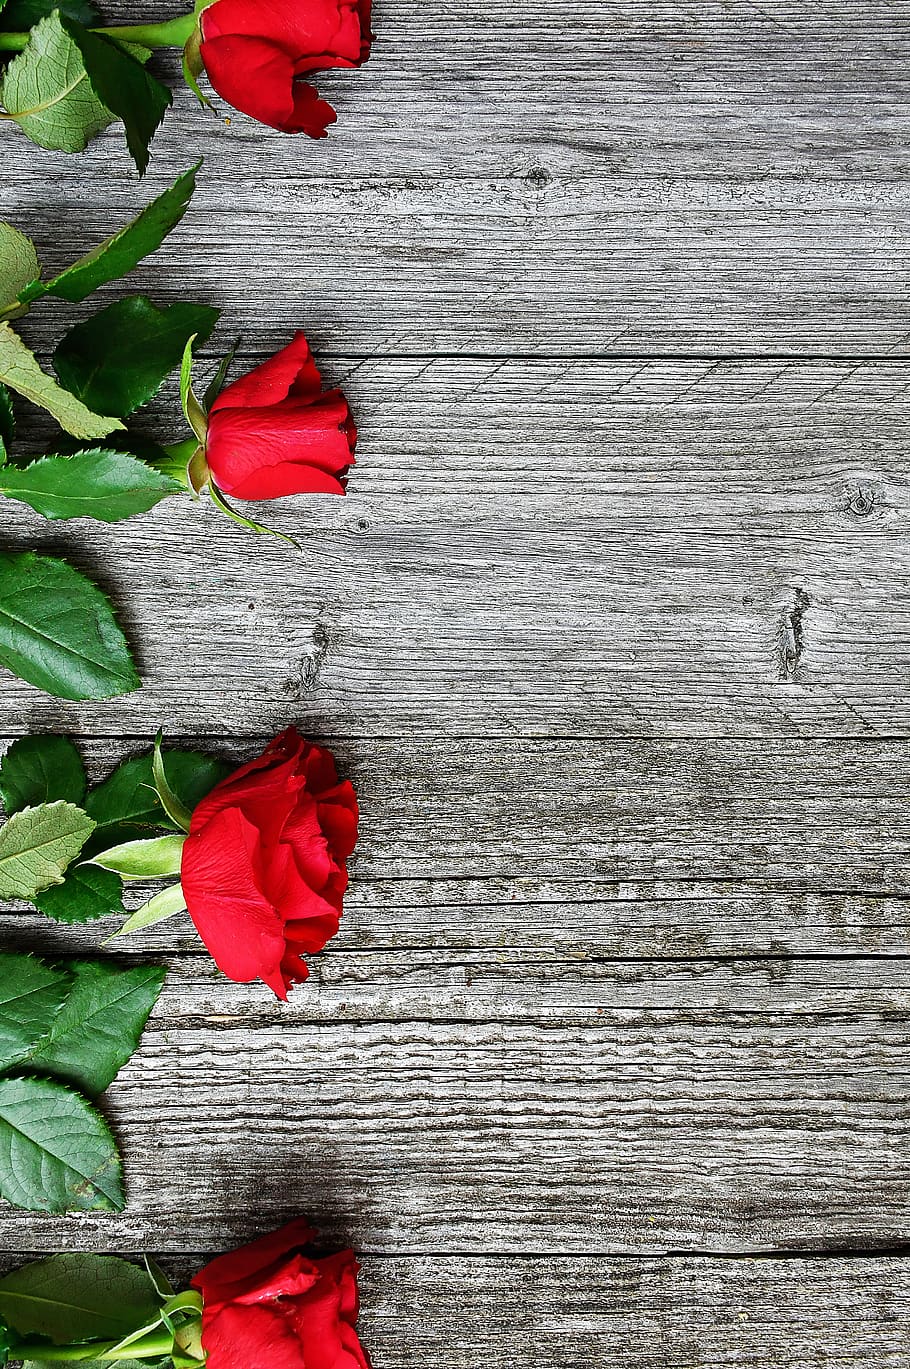 red, red rose, love, romantic, roses, nature, romance, beauty, valentine's, valentine's day